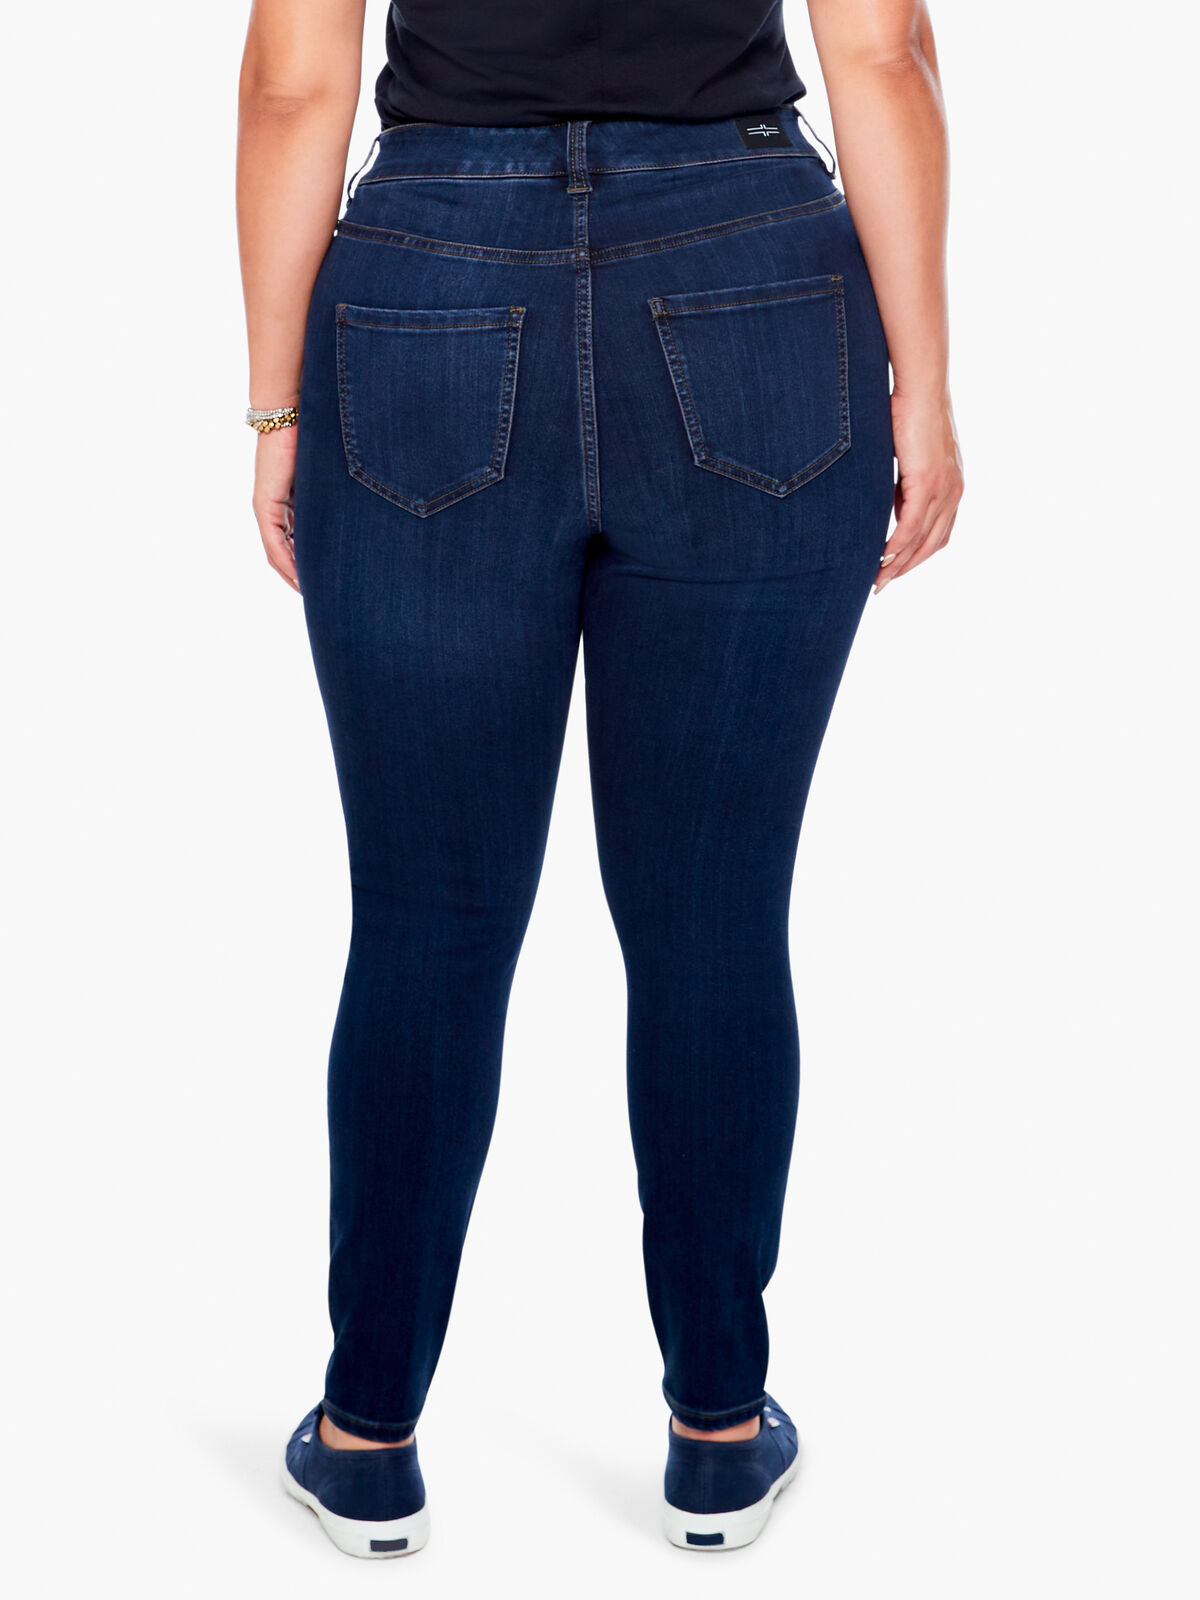 Liverpool - Abby Hi-Rise Ankle Skinny Jean